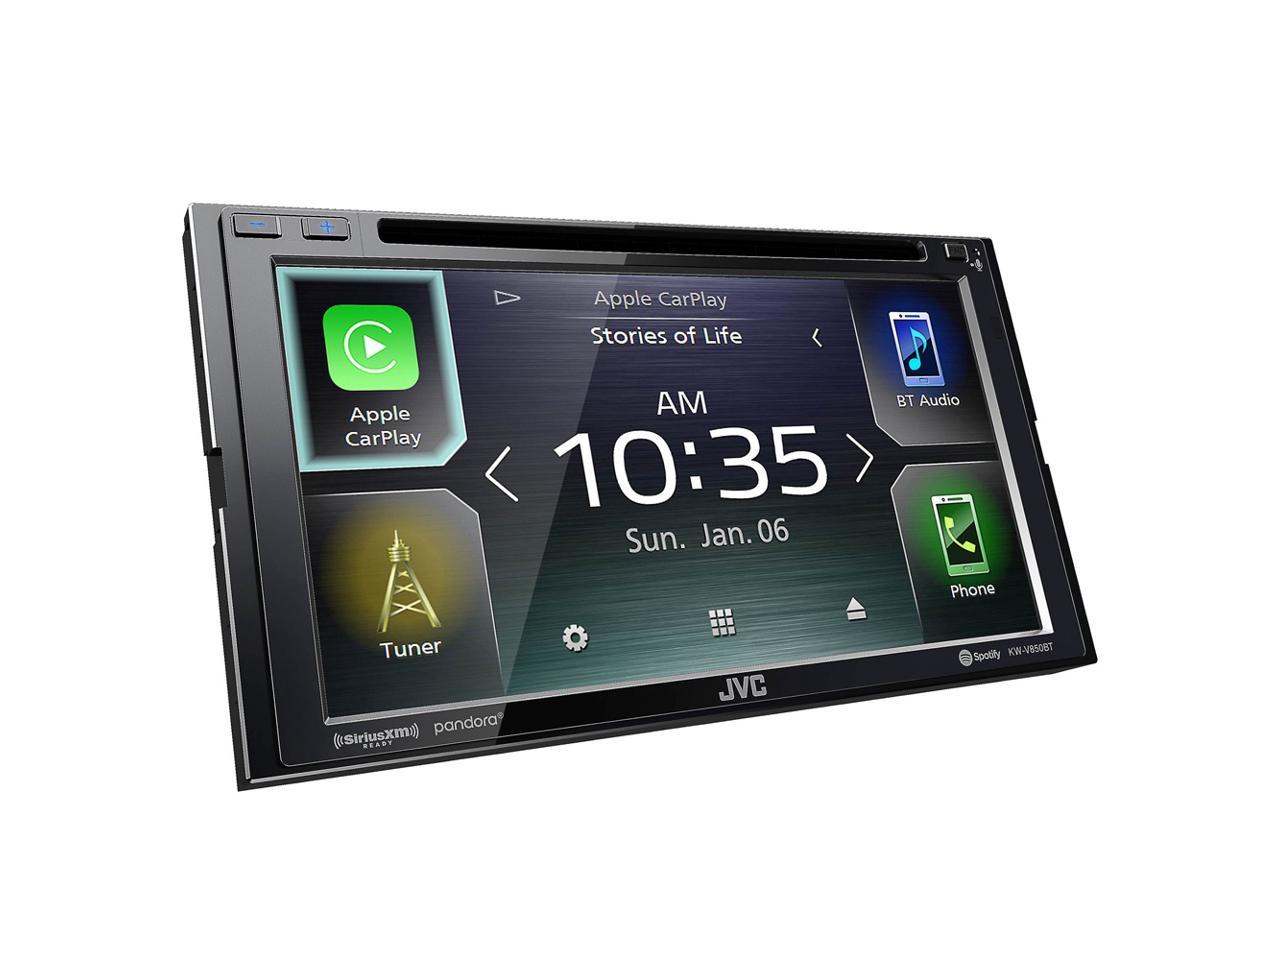 JVC KW-V850BT DVD receiver w/ integrated 6.8" monitor+Absolute CAM880 Rearview Camera & Magnet Phone Holder